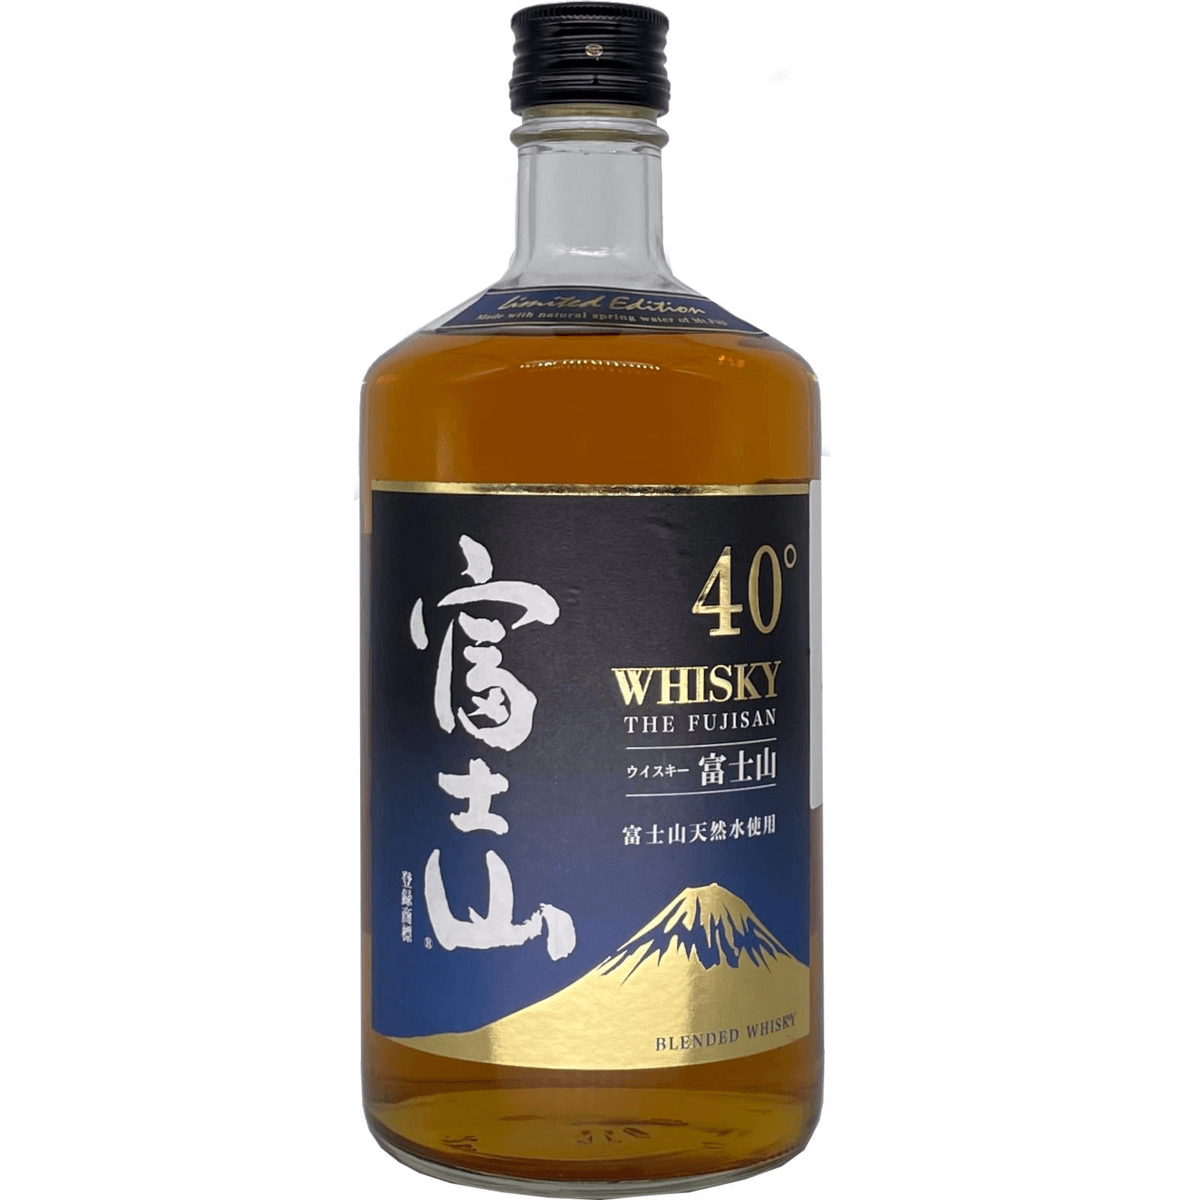 The Fujisan Limited | Whisky Vol. Blended Edition 0,7L Winebuyers Japanese 40